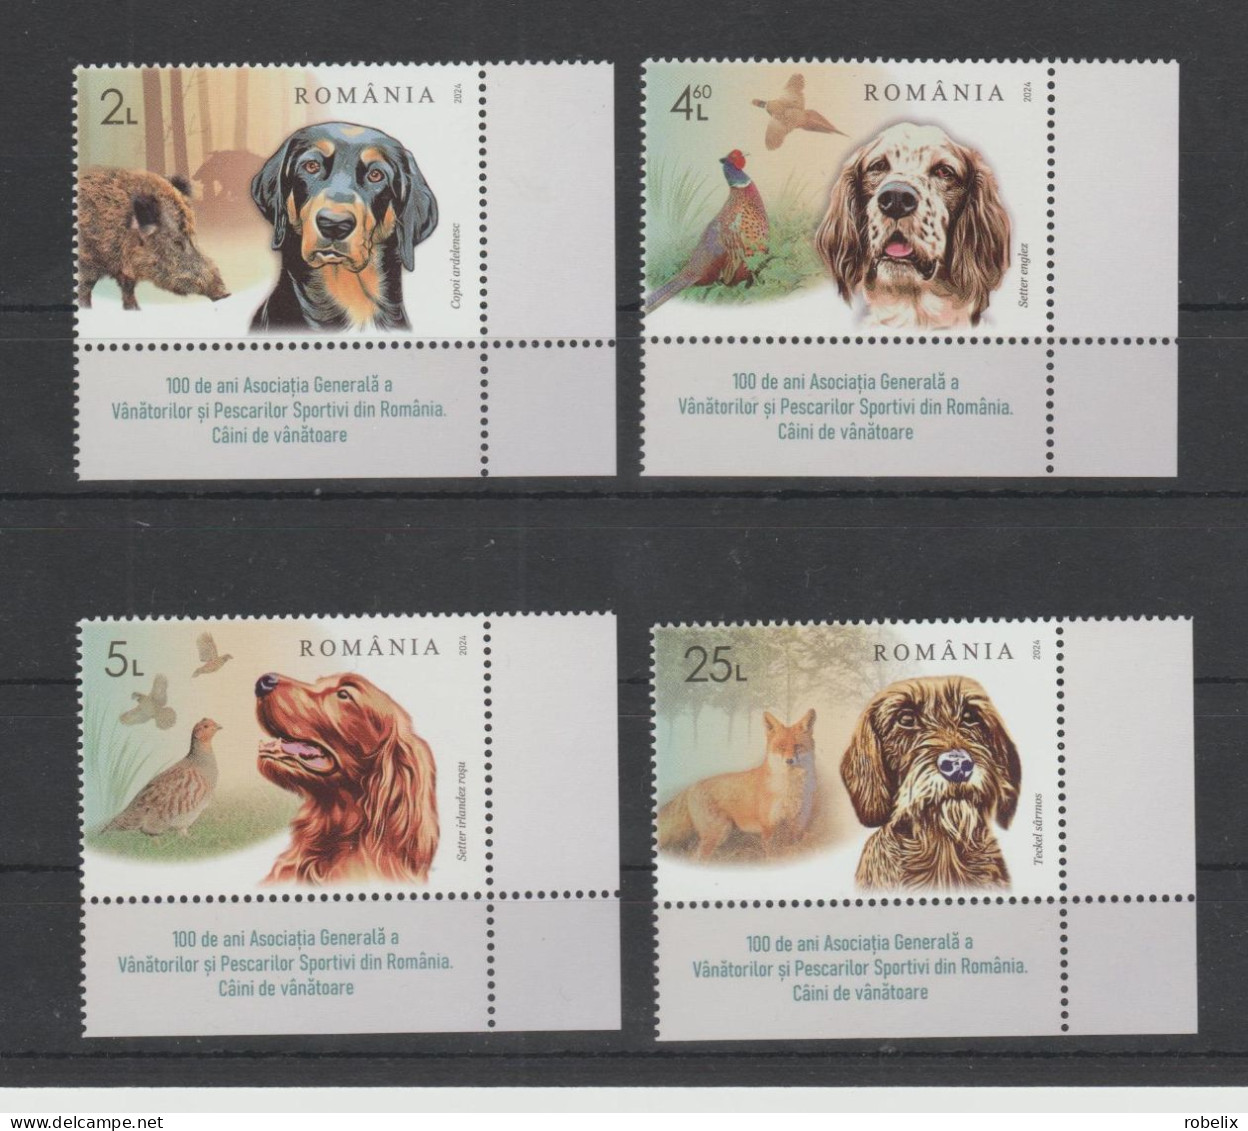 ROMANIA 2024 DOGS - HUNTING DOGS - WILD PIG, FOX, PHEASANT  Set Of 4 Stamps MNH** - Dogs